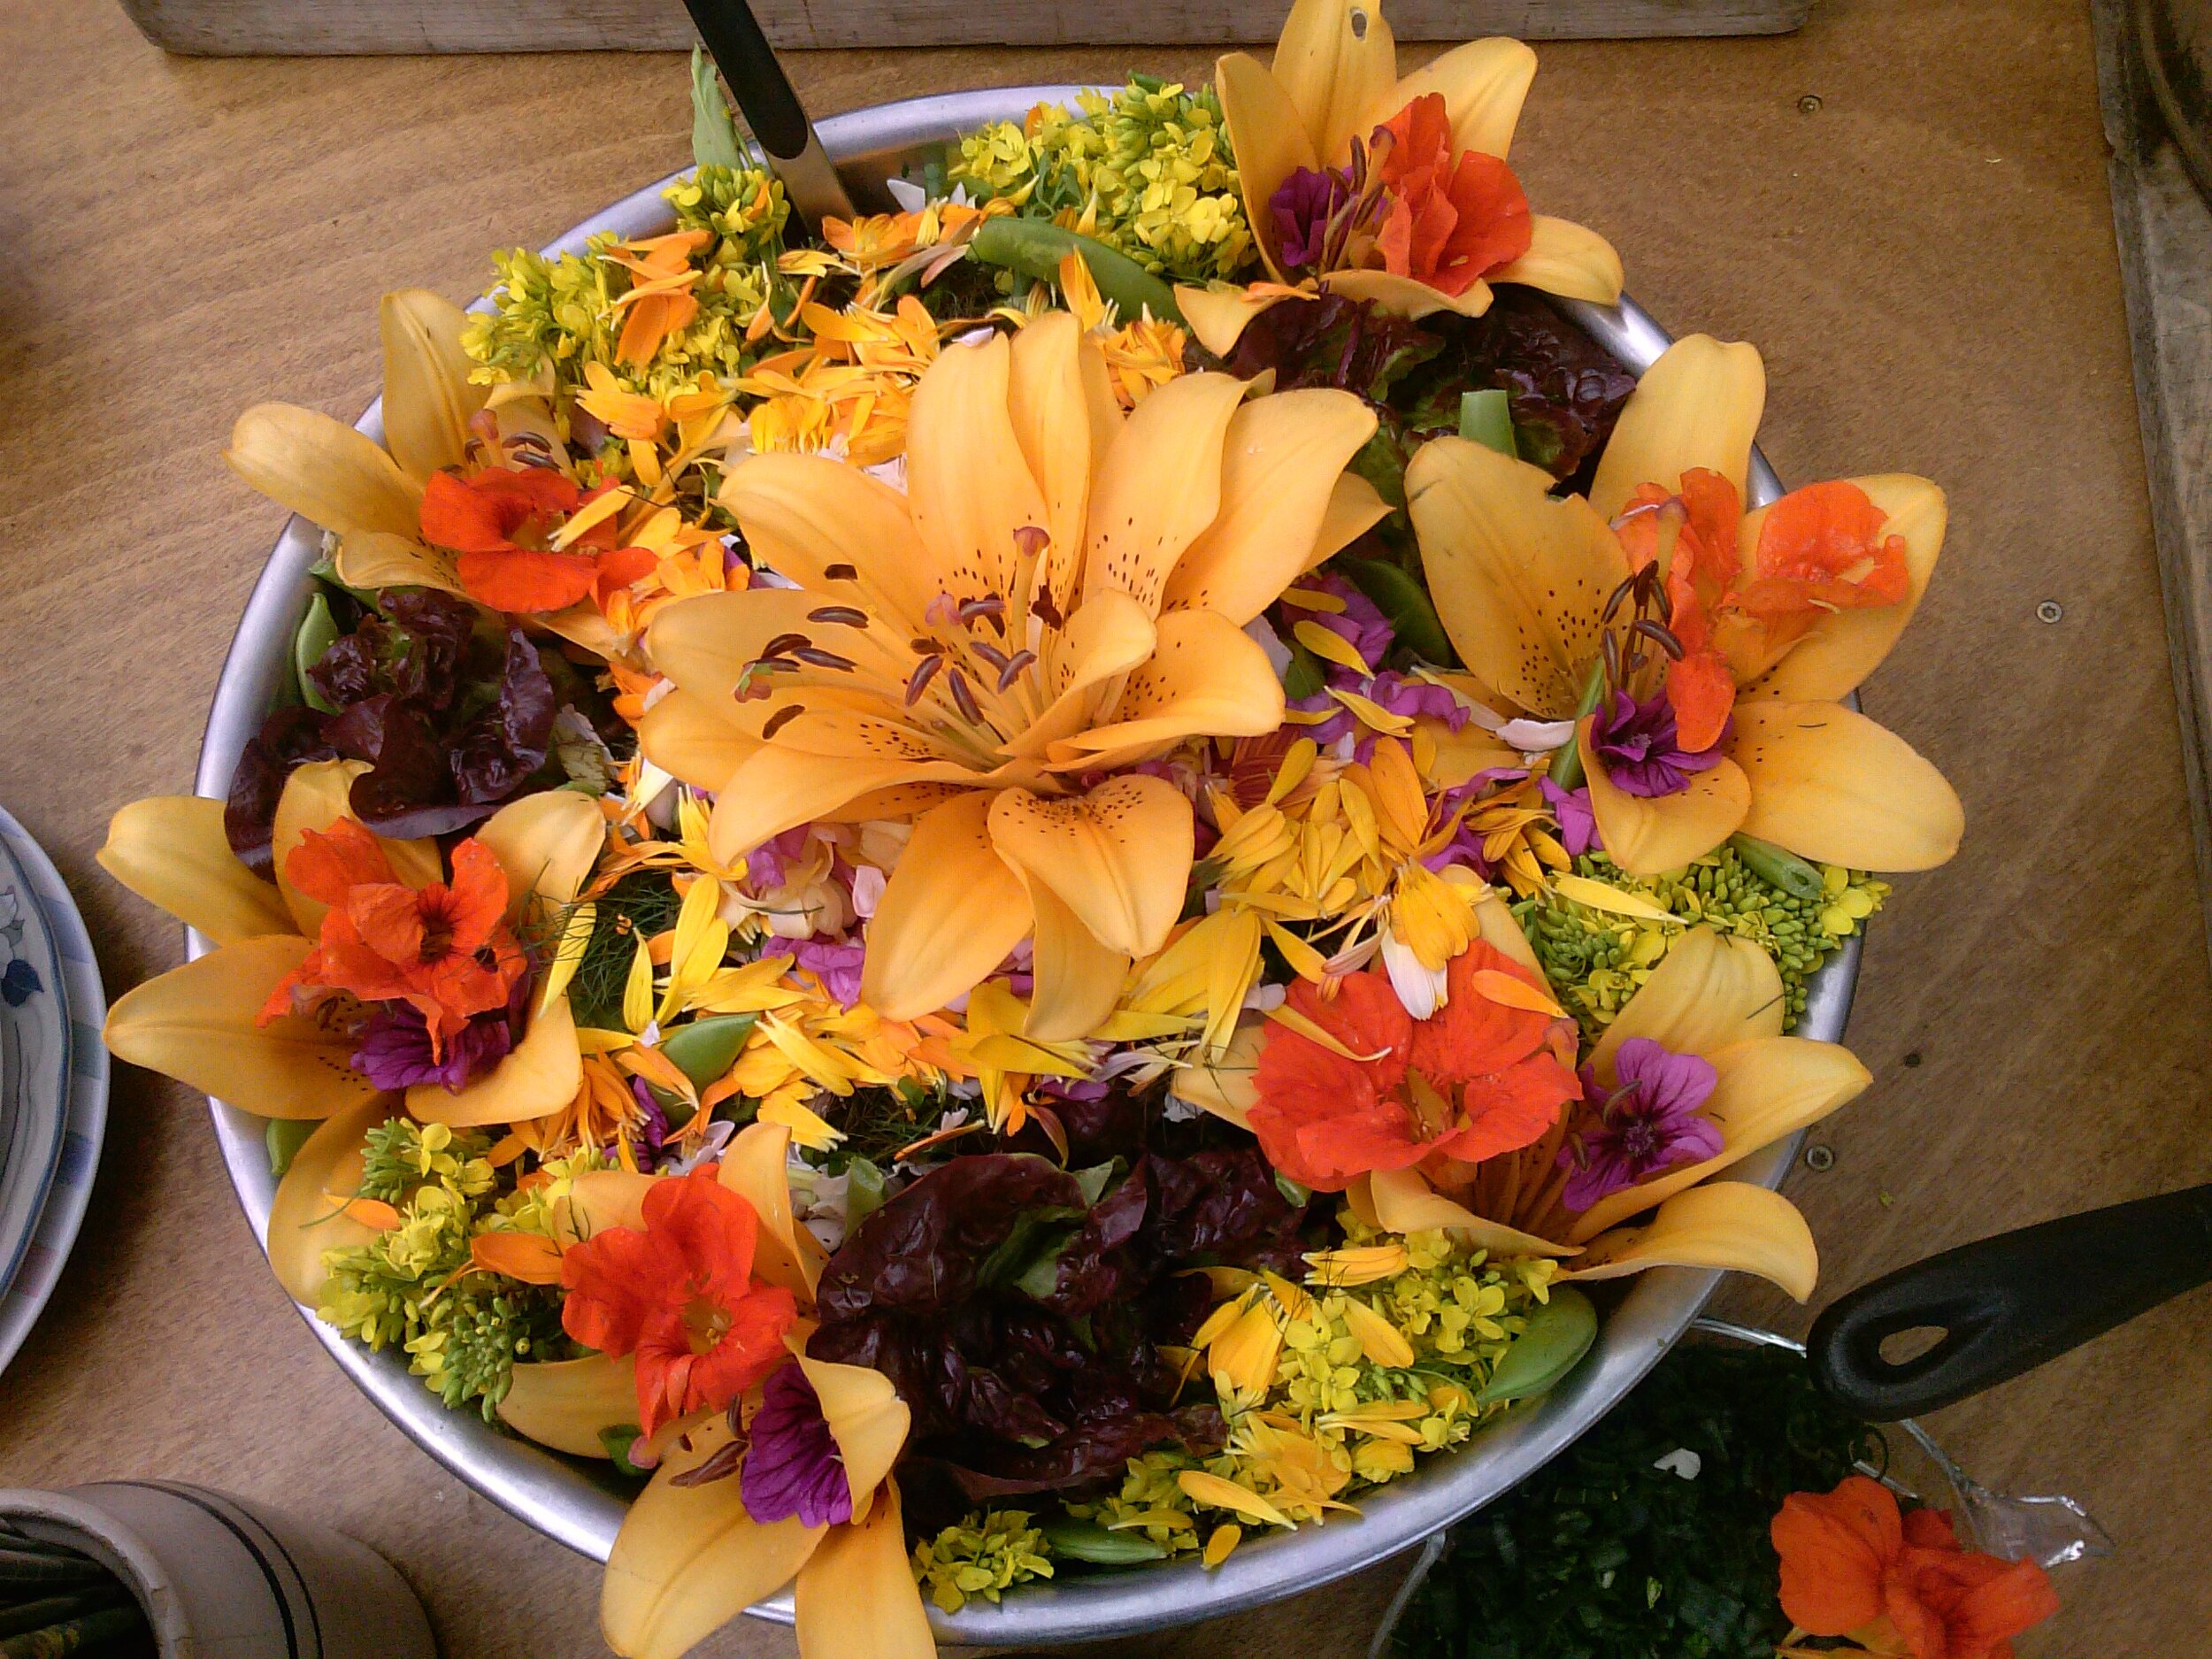 Using and Growing Edible Flowers for Floral Design